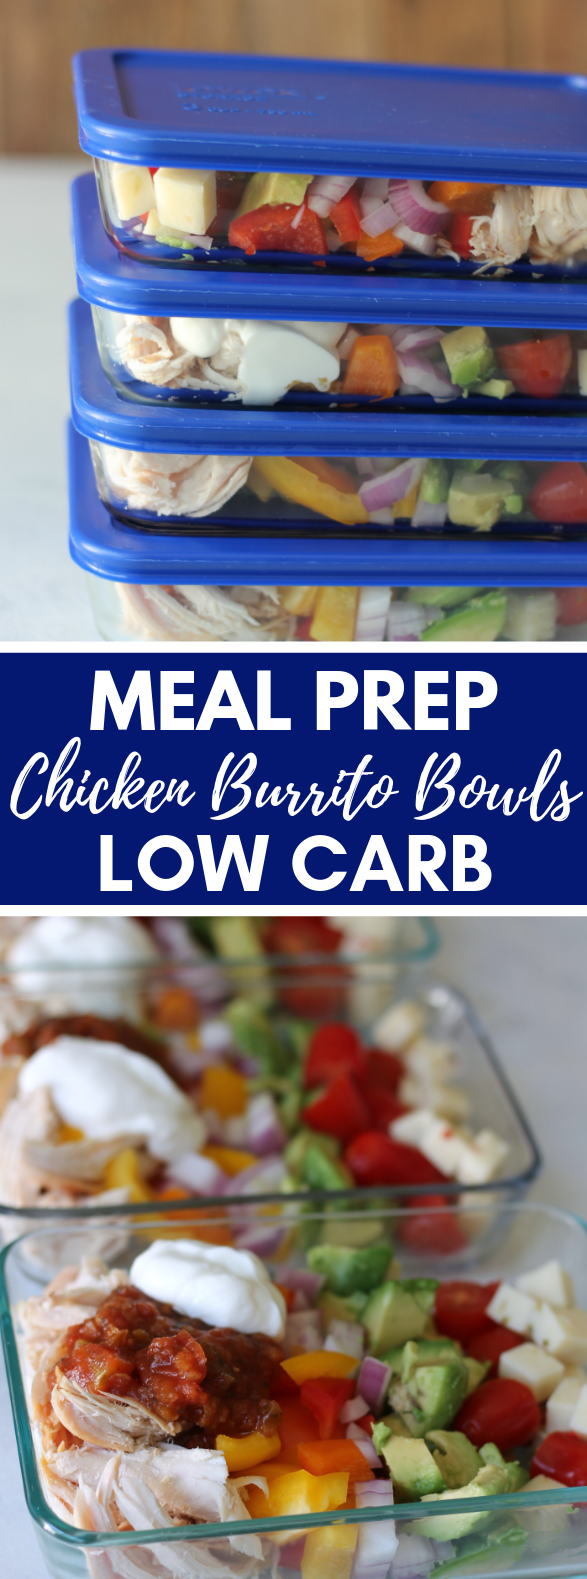 Meal Prep Low-Carb Chicken Burrito Bowls #dietmeal #recipes